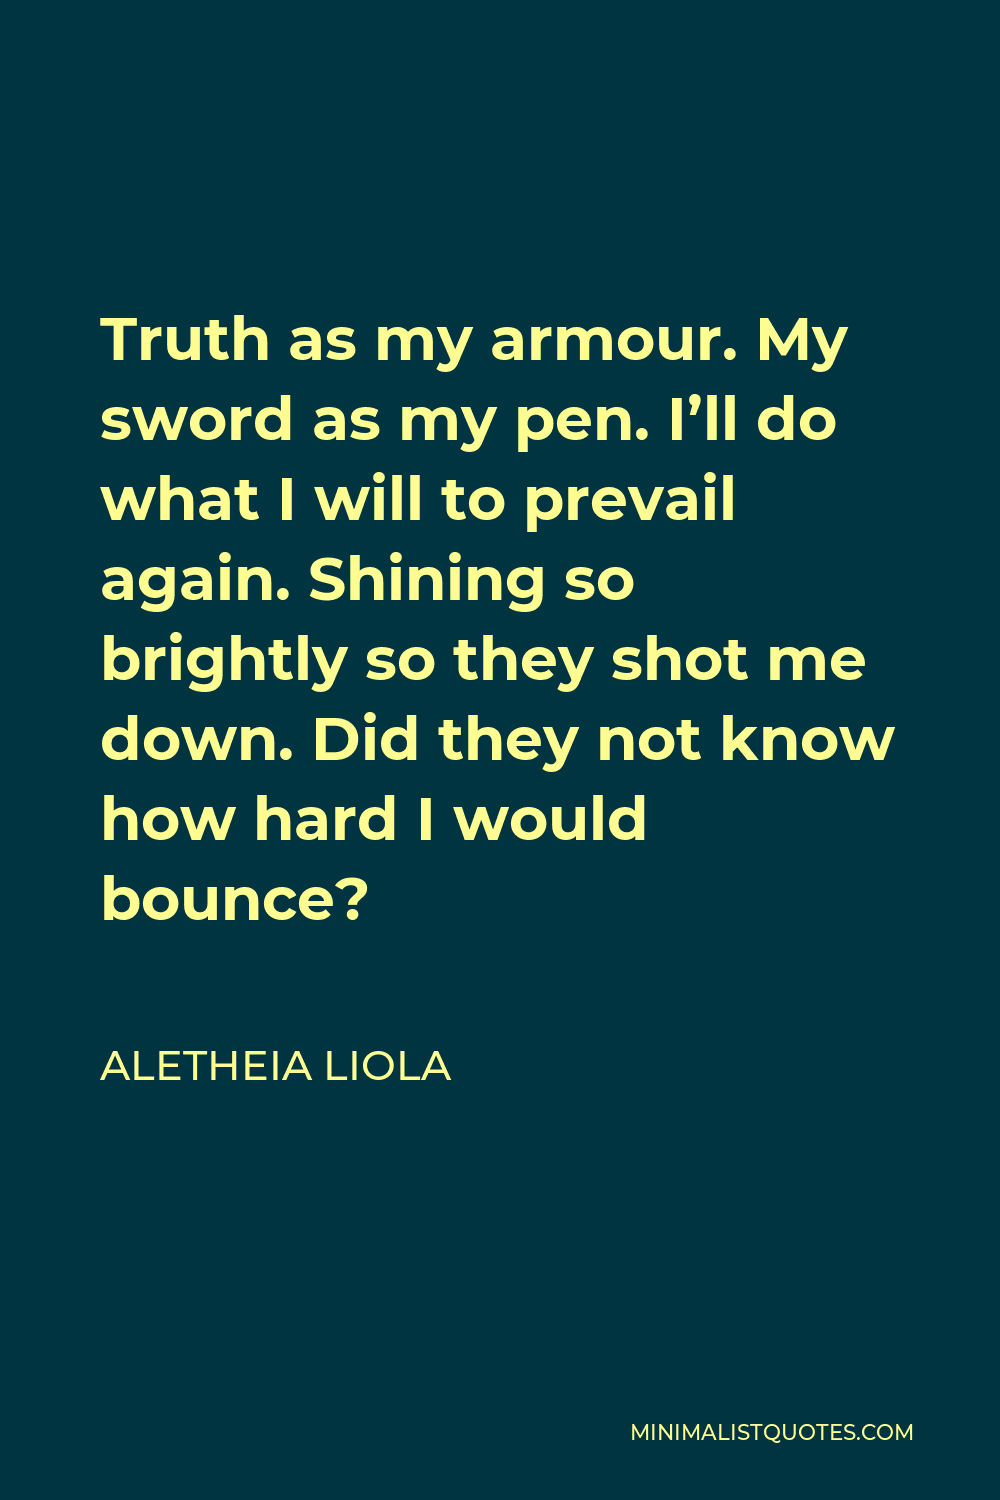 Aletheia Liola Quote - Truth as my armour. My sword as my pen. I’ll do what I will to prevail again. Shining so brightly so they shot me down. Did they not know how hard I would bounce?